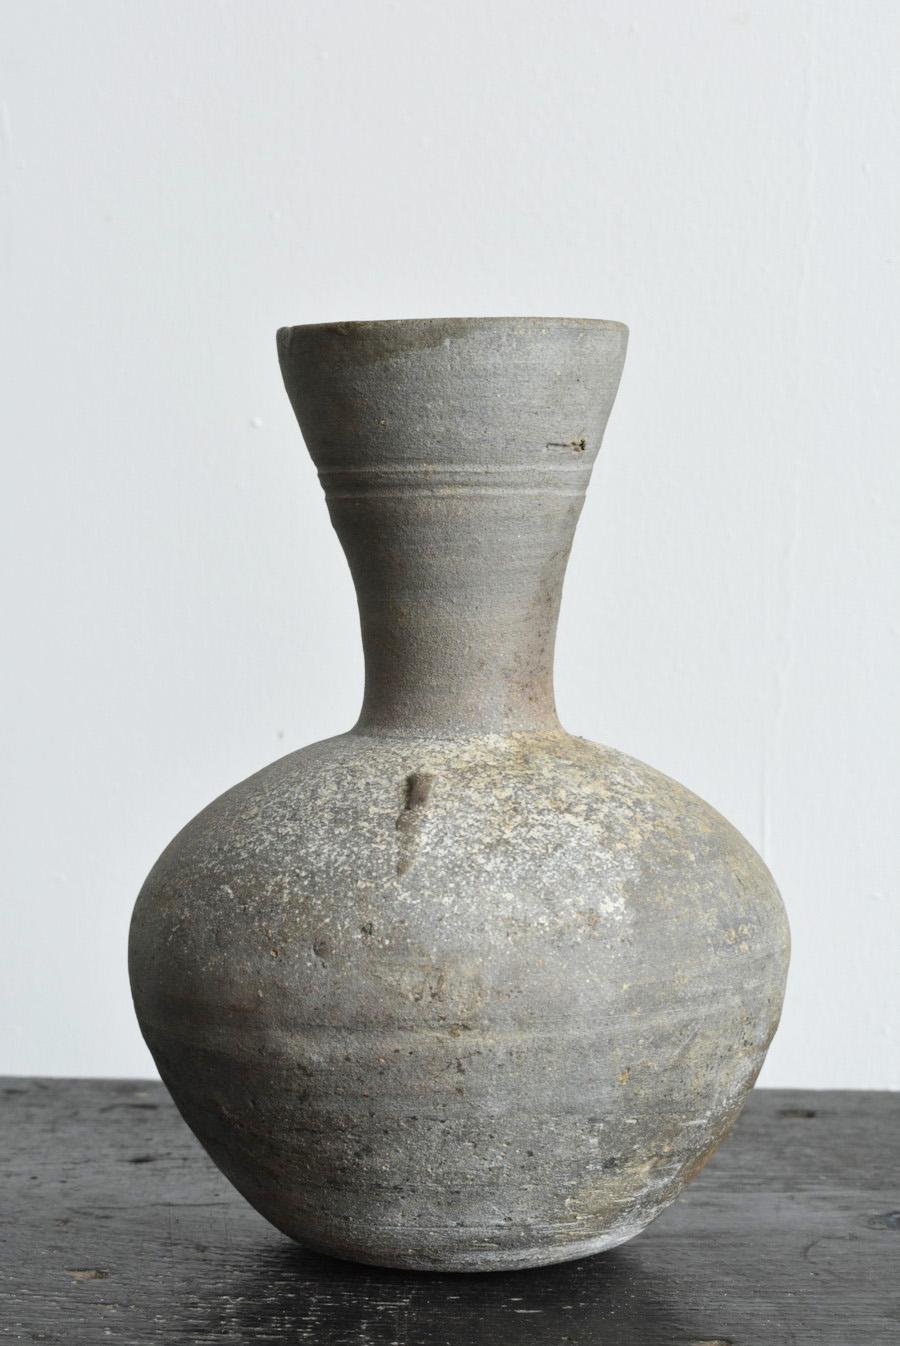 18th Century and Earlier Antique Pottery Vase with a Sense of Japanese Wabi-Sabi / Early 9th Century